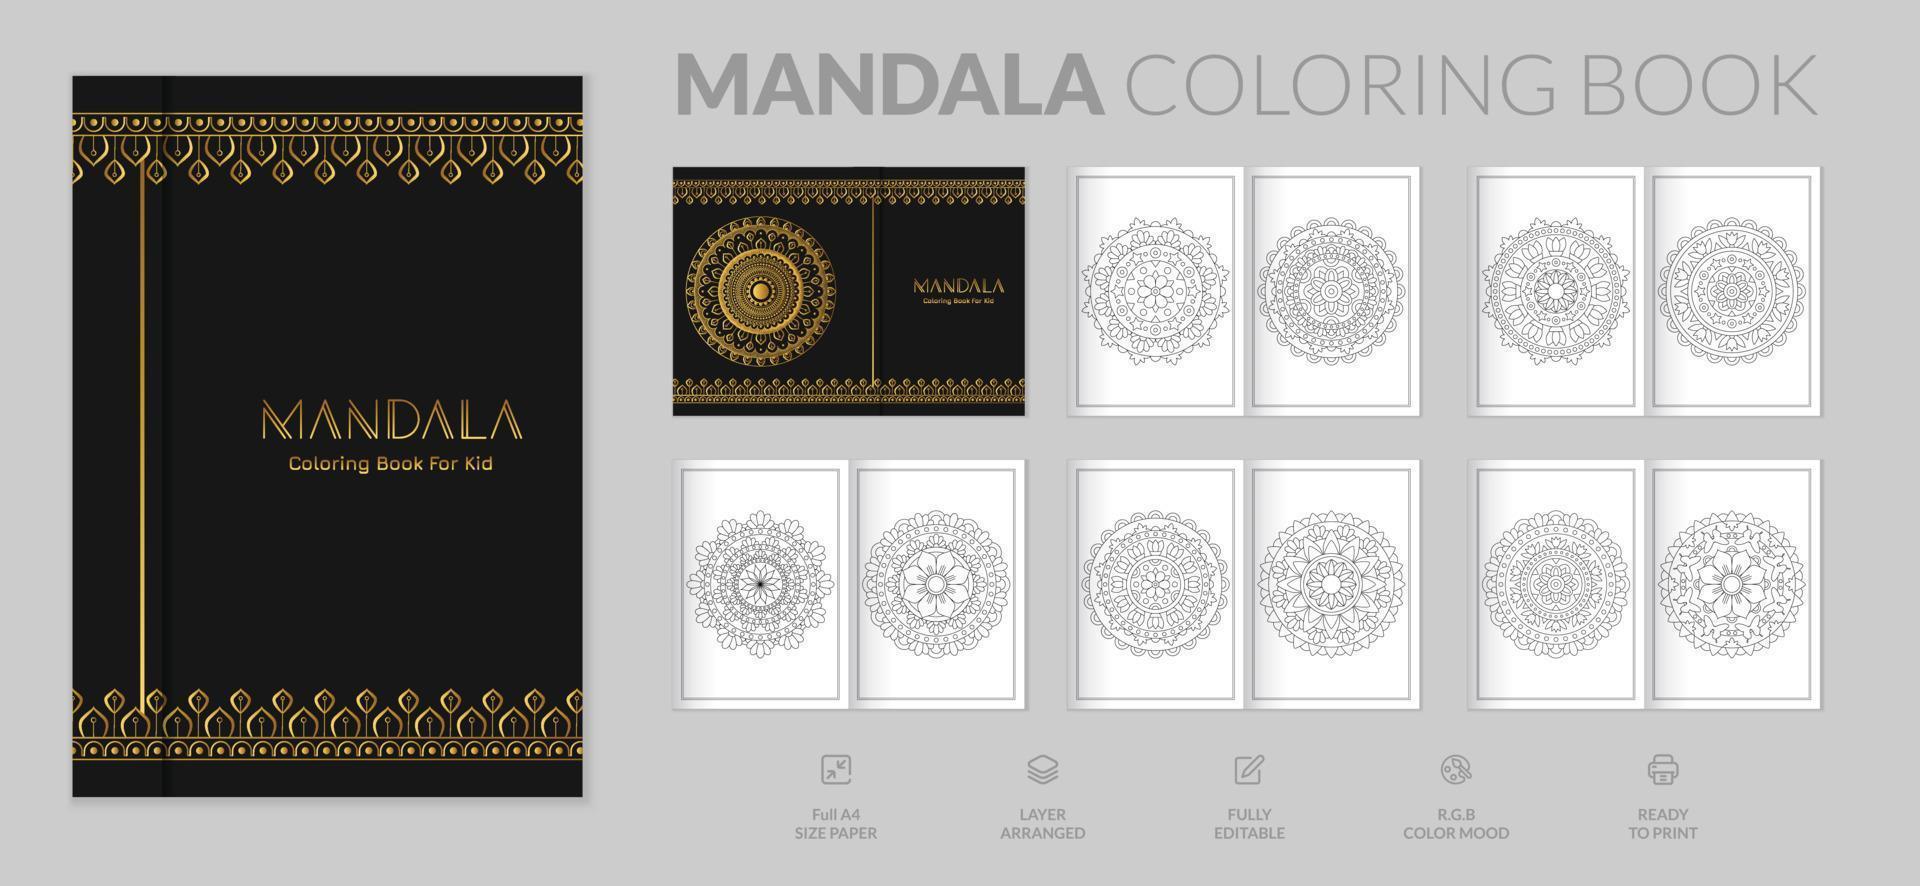 Ready to print 10 page with cover page beautiful mandala coloring book design vector illustration